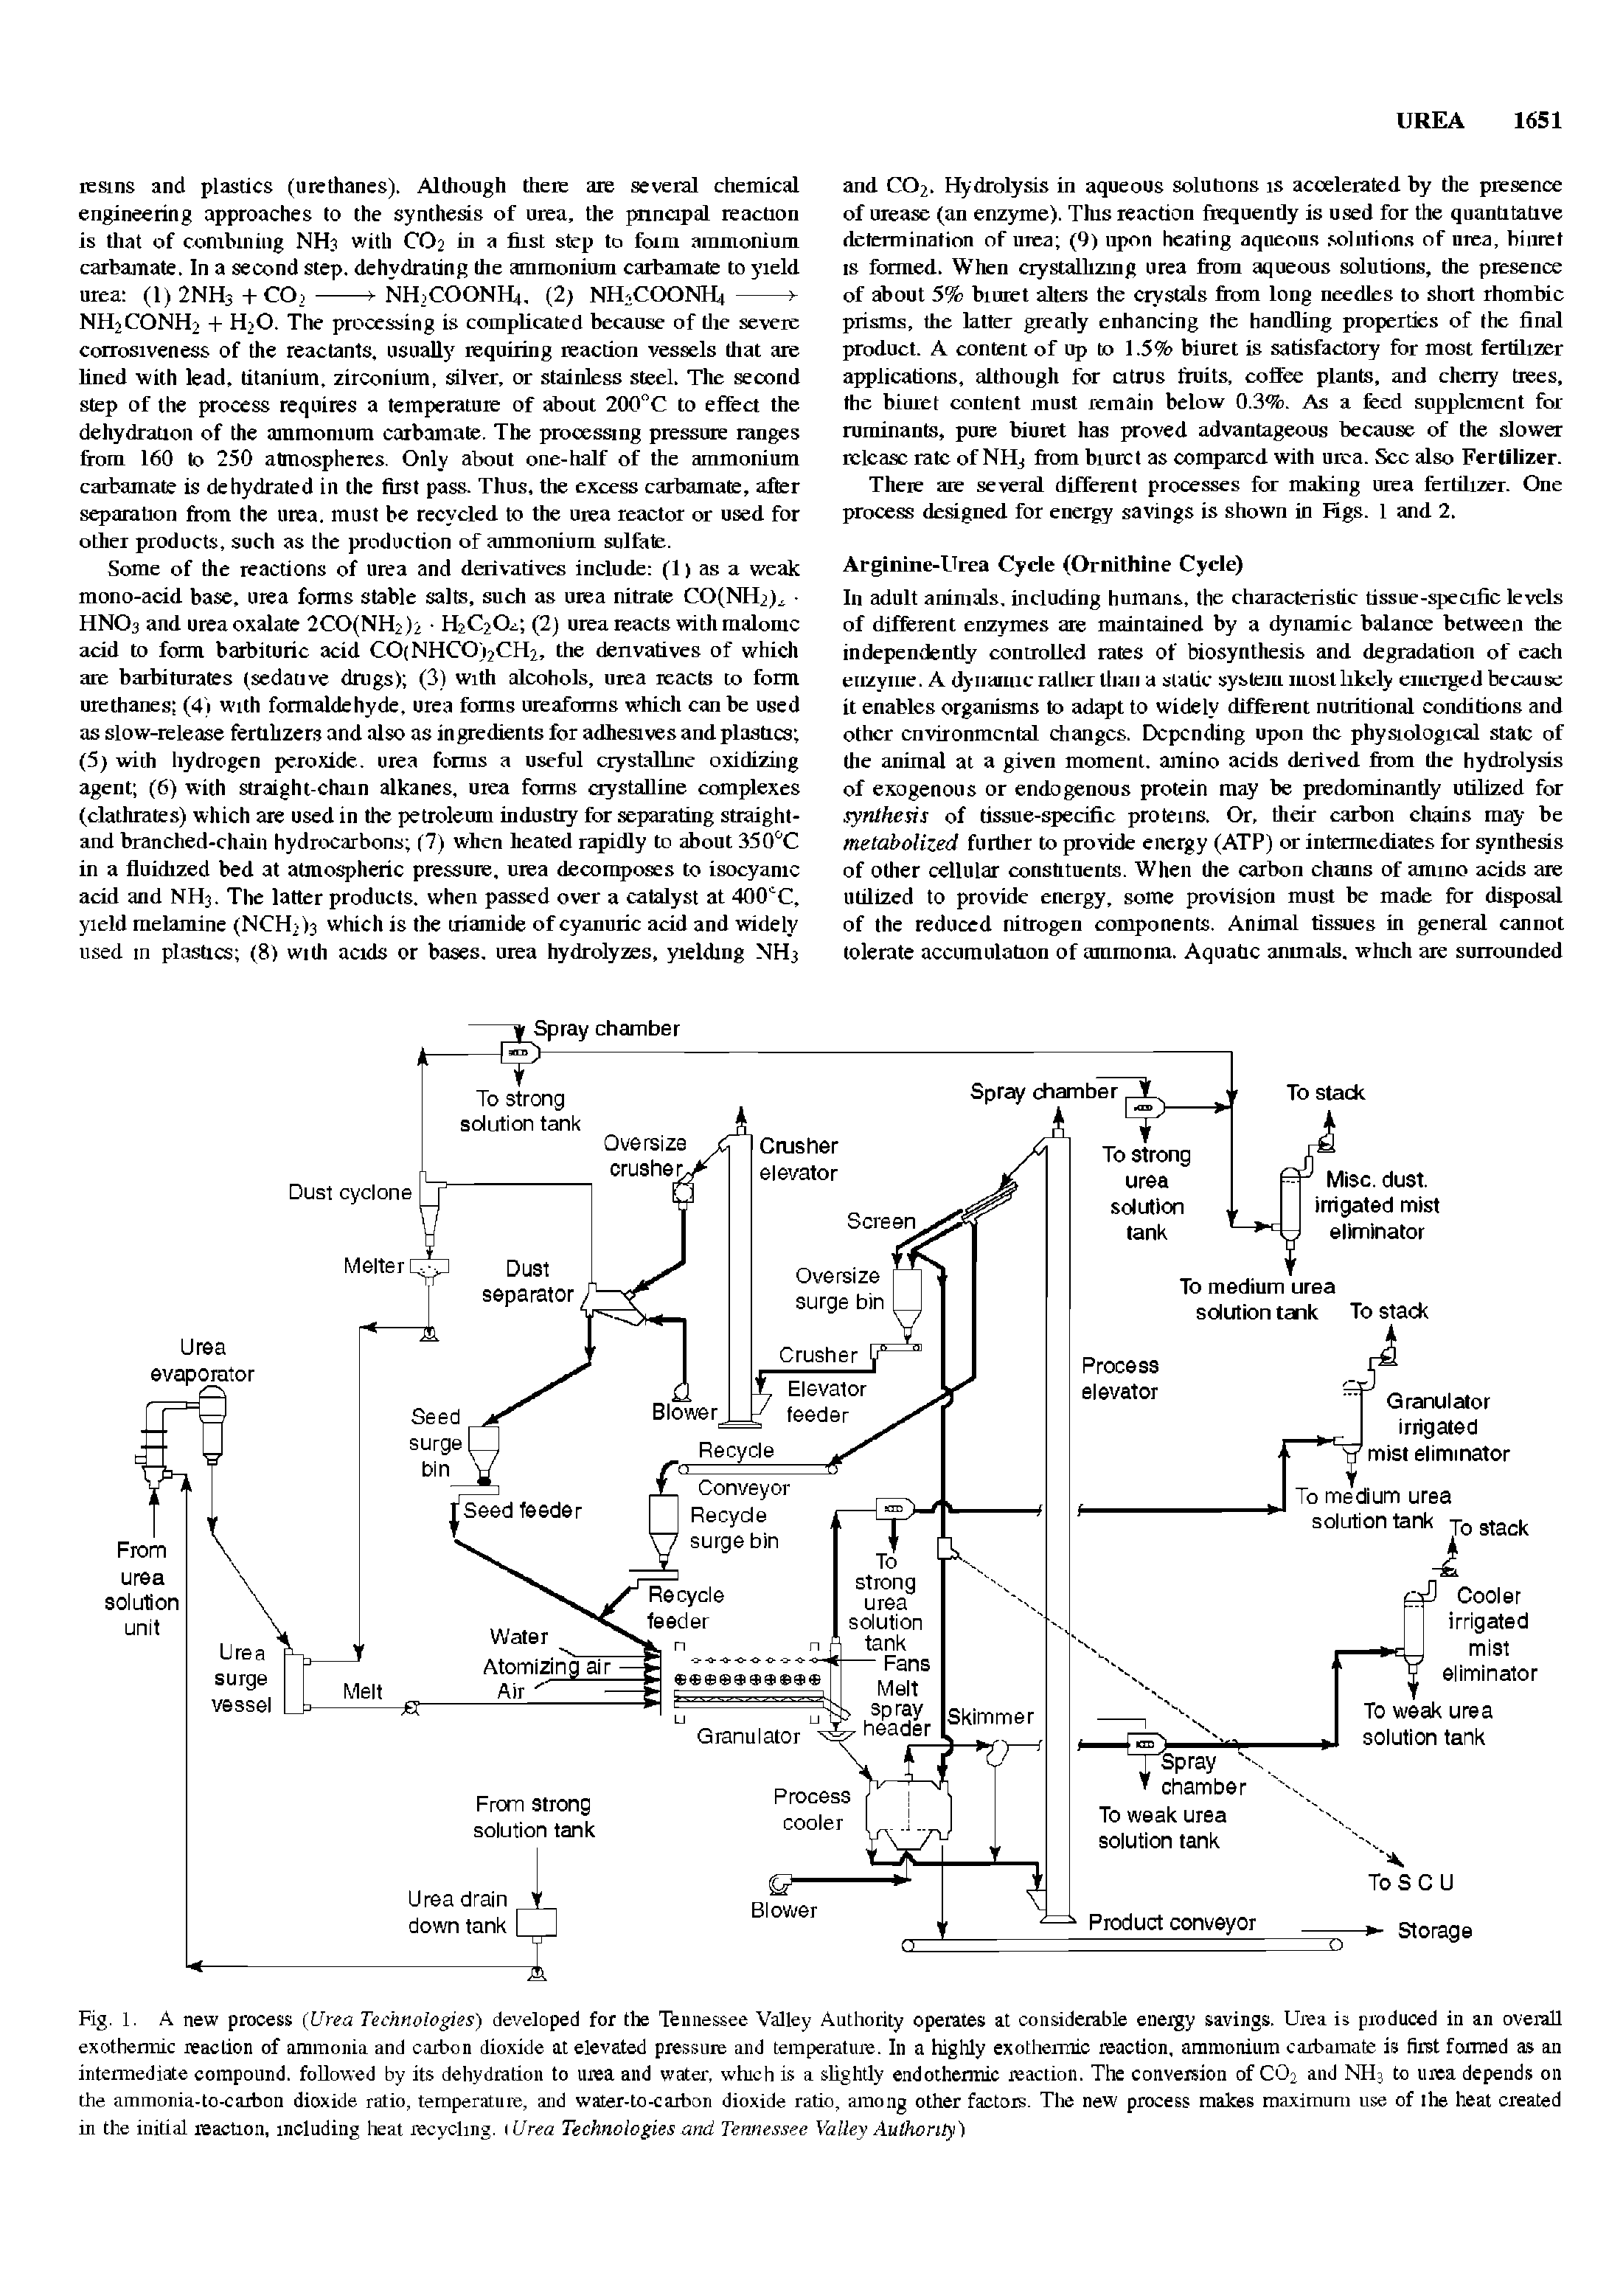 Fig. 1. A new process (Urea Technologies) developed for the Tennessee Valley Authority operates at considerable energy savings. Urea is produced in an overall exothermic reaction of ammonia and carbon dioxide at elevated pressure and temperature. In a highly exothermic reaction, ammonium carbamate is first formed as an intermediate compound, followed by its dehydration to urea and water, which is a slightly endothermic reaction. The conversion of CO2 and NH3 to urea depends oil the ammonia-to-caibon dioxide ratio, temperature, and water-to-carbon dioxide ratio, among other factors. The new process makes maximum use of the heat created in the initial reaction, including heat recycling. 1 Urea Technologies and Tennessee Valley Authority)...